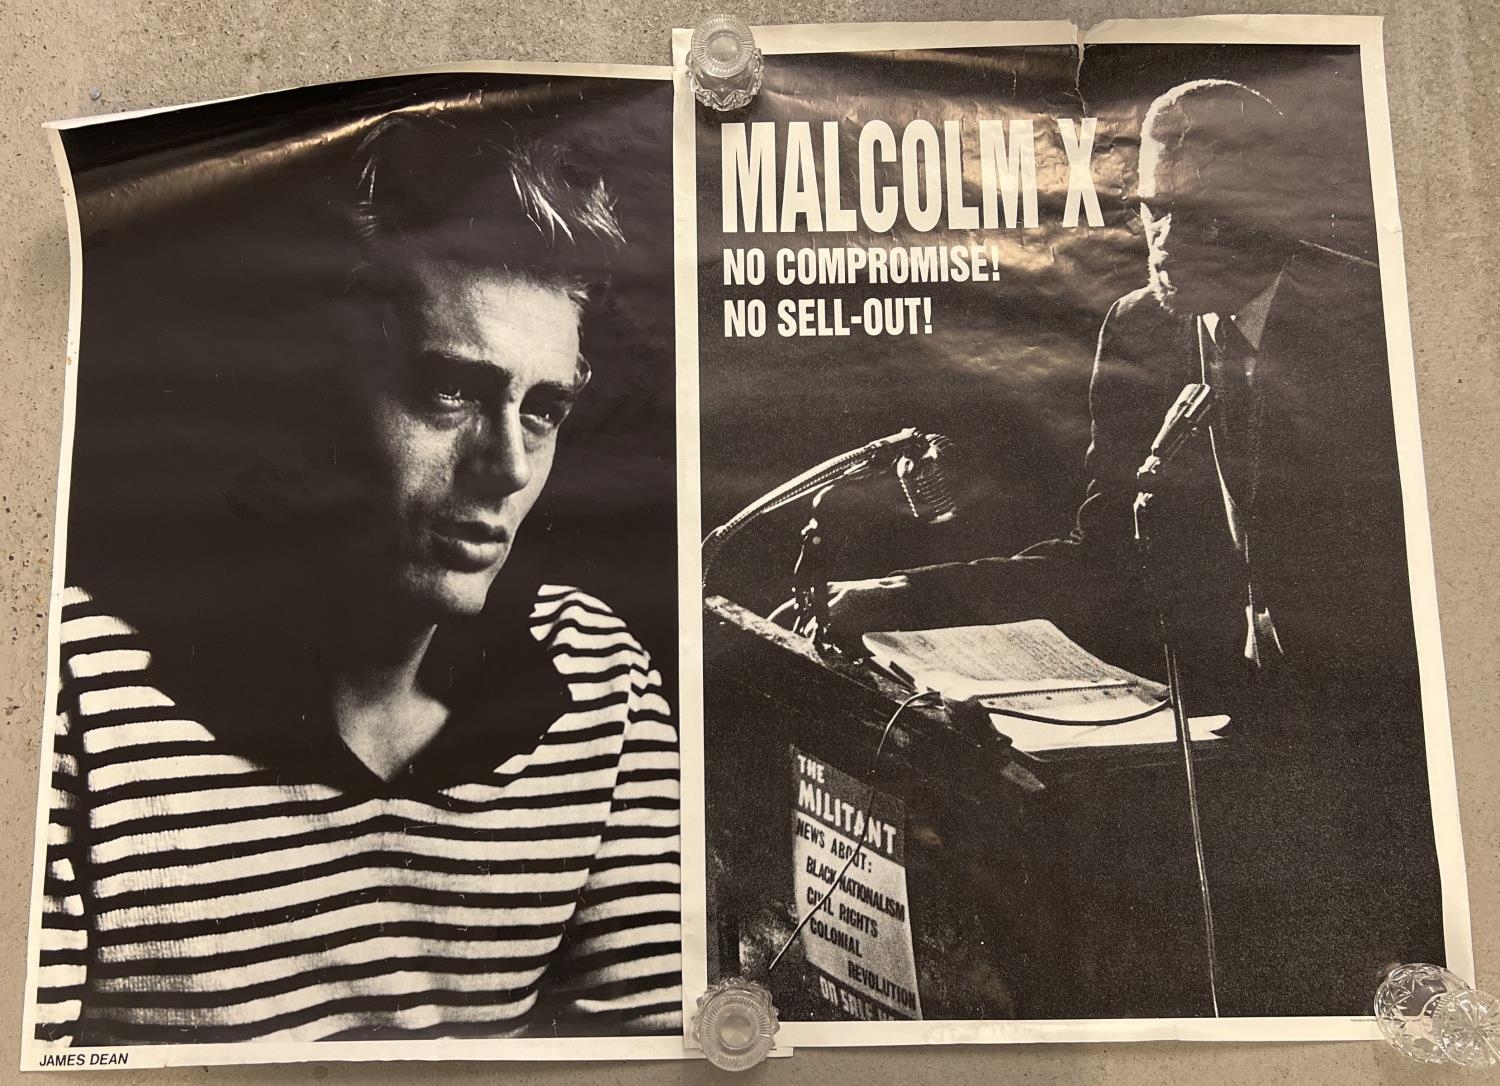 2 vintage posters. Malcolm X No Compromise,! No Sell-out! poster together with a poster of James